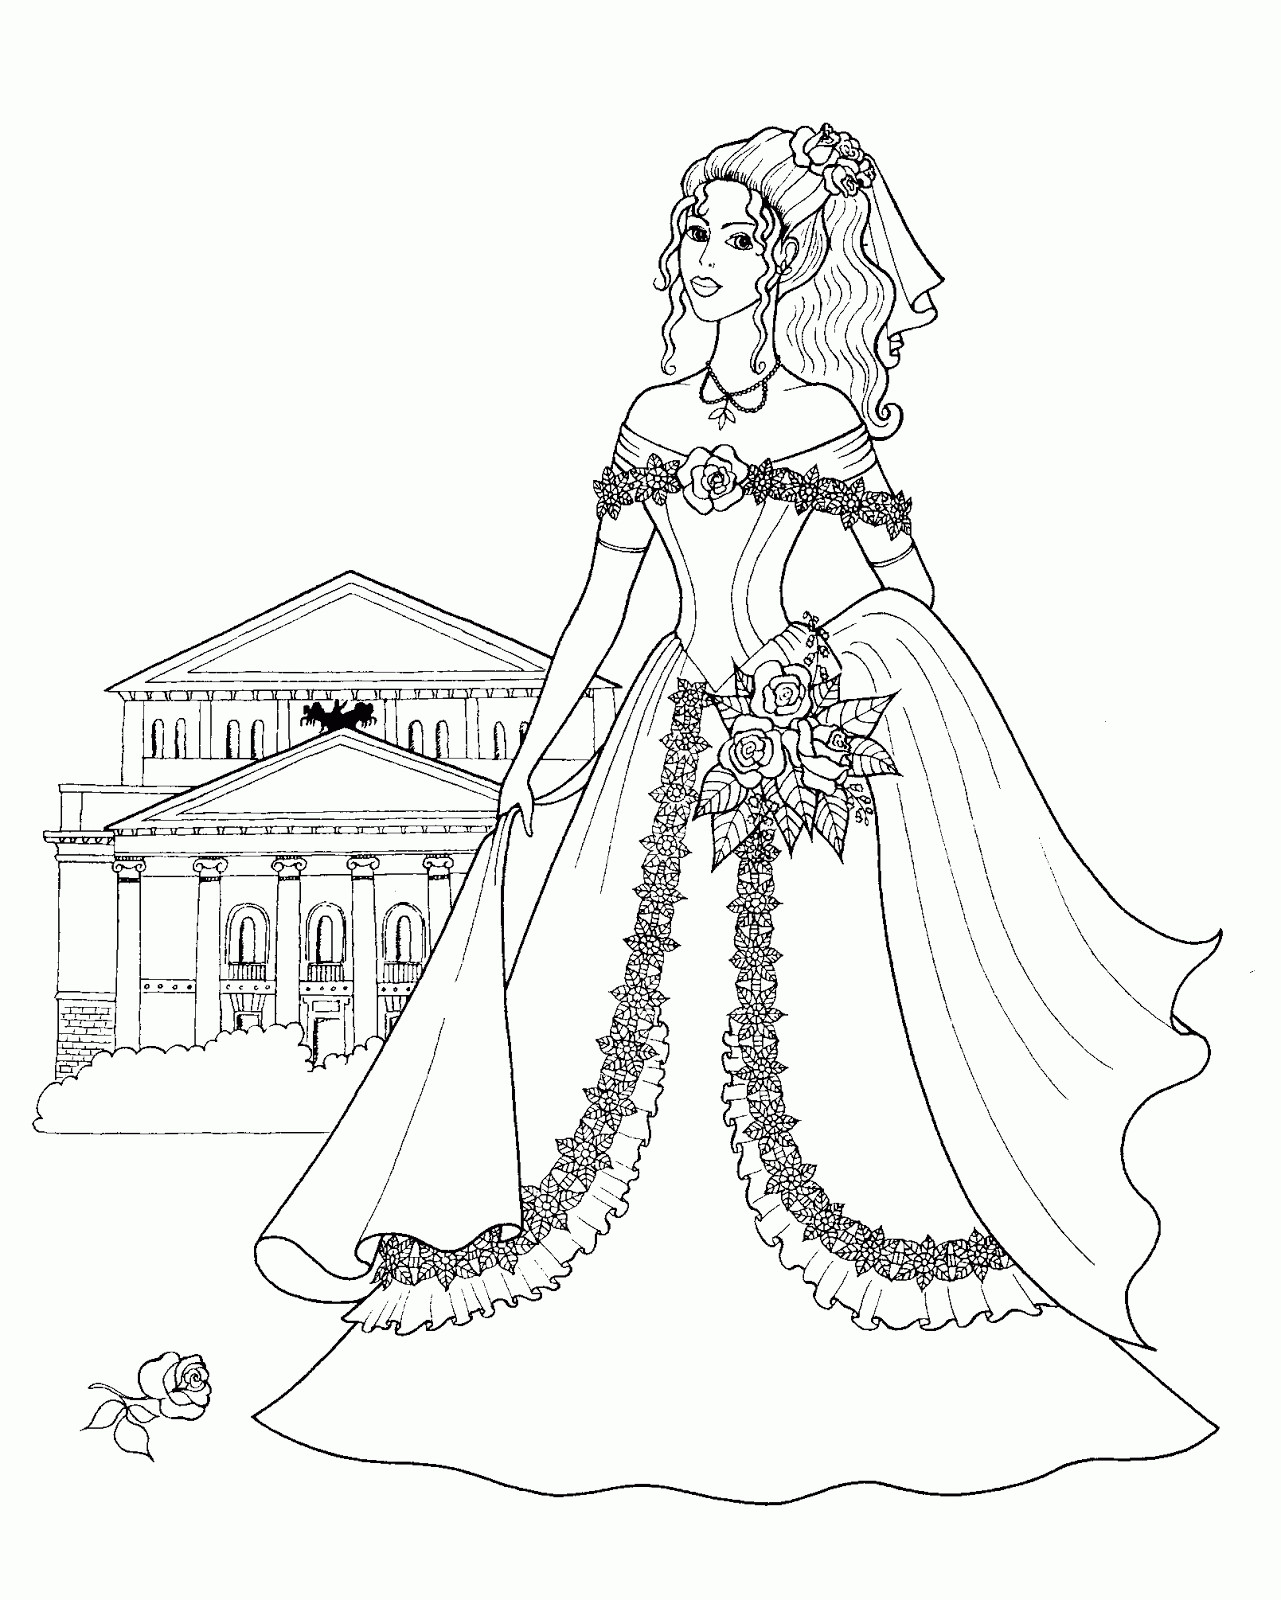 Free Printable Girls Coloring Pages
 Coloring Pages Fashionable Girls free printable coloring